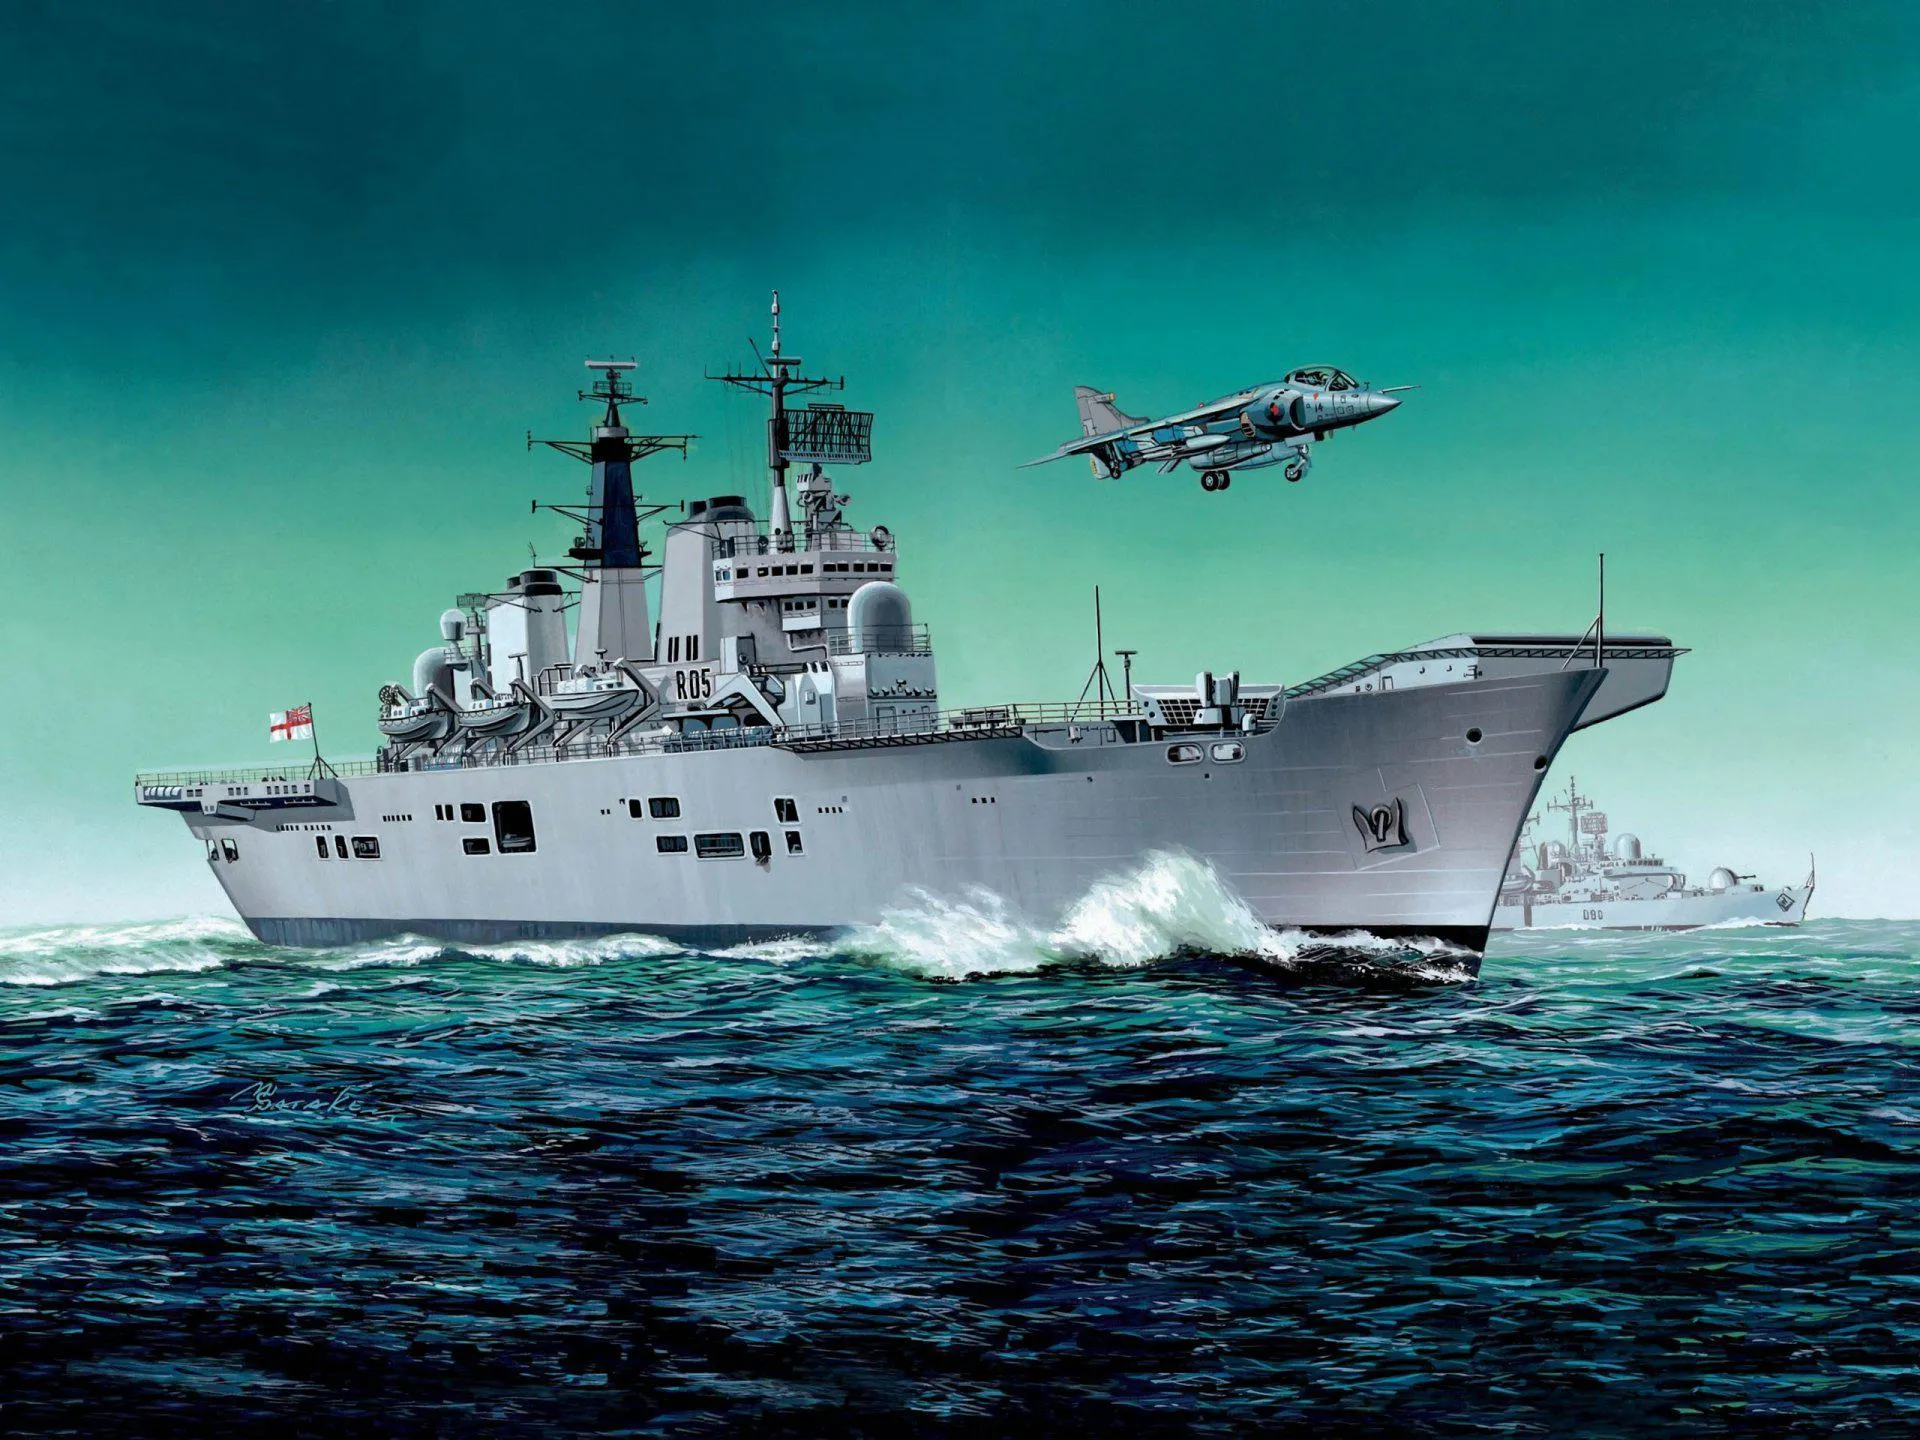 art-navy-ship-the-carrier-class-invincible-english-unbeaten-indomitable-will-invincible-royal-british-military-maritime-fleet-navy-great-britain